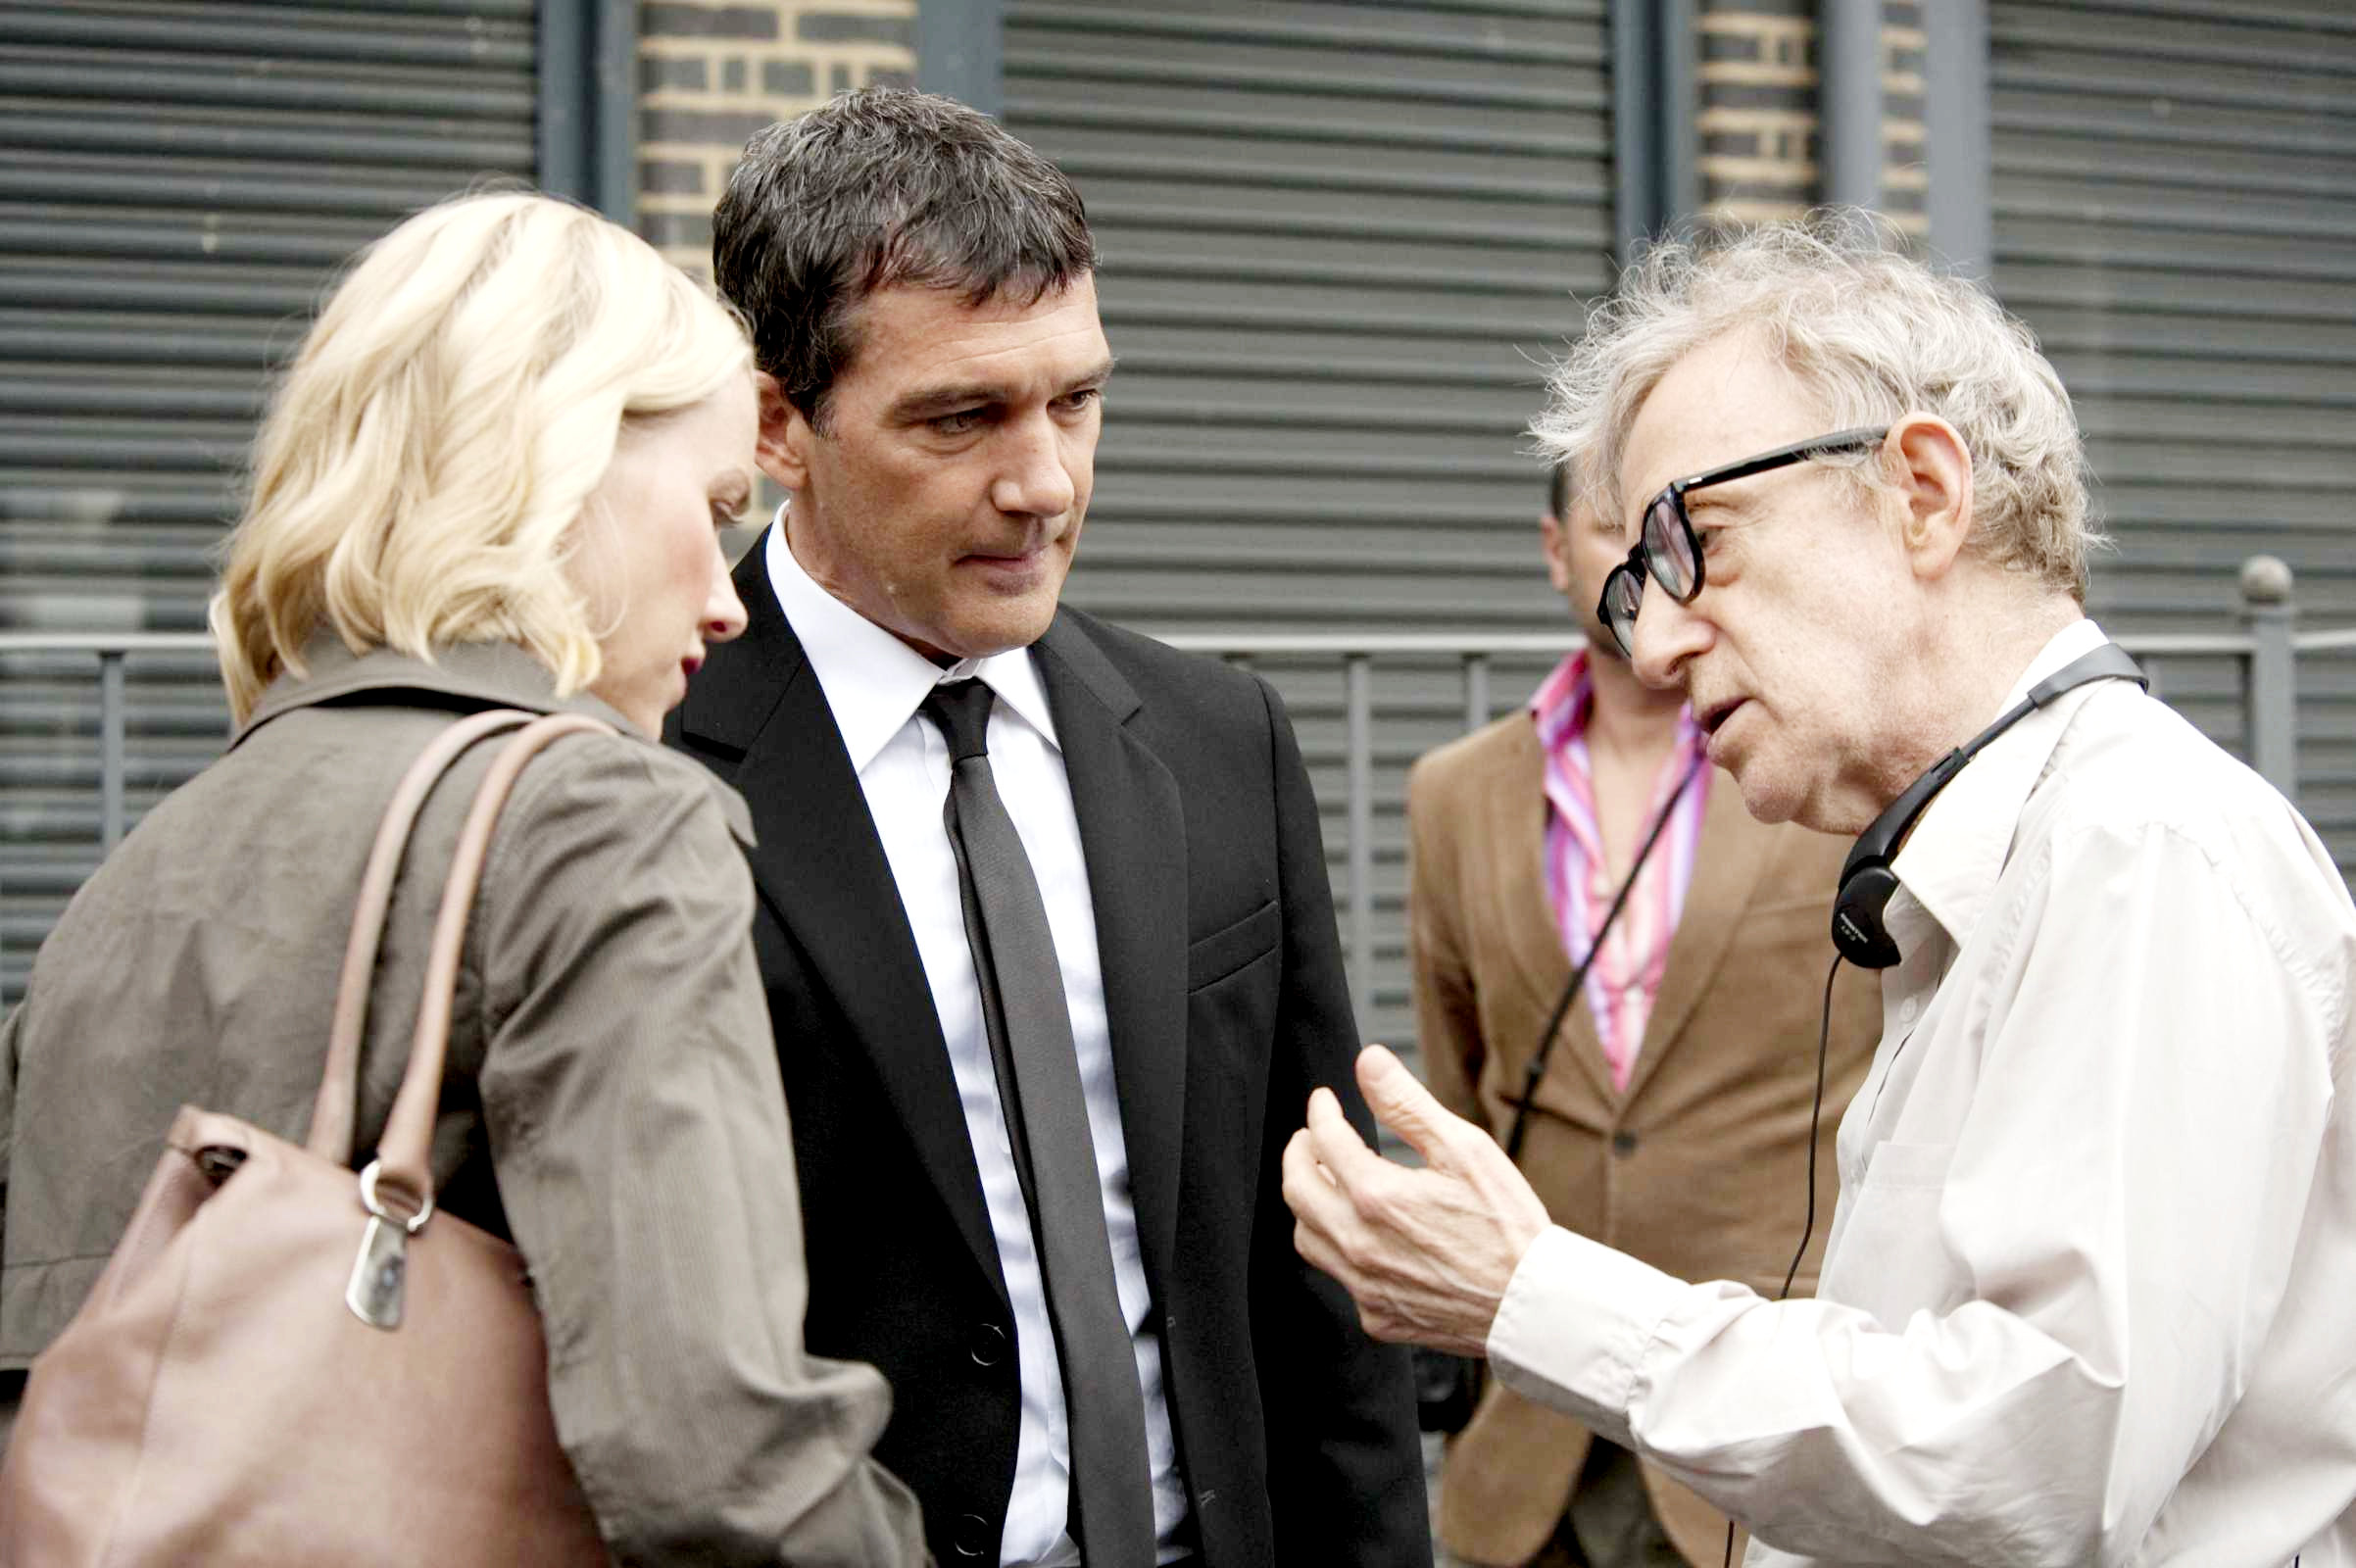 Naomi Watts, Antonio Banderas and Woody Allen in Sony Pictures Classics' You Will Meet a Tall Dark Stranger (2010)